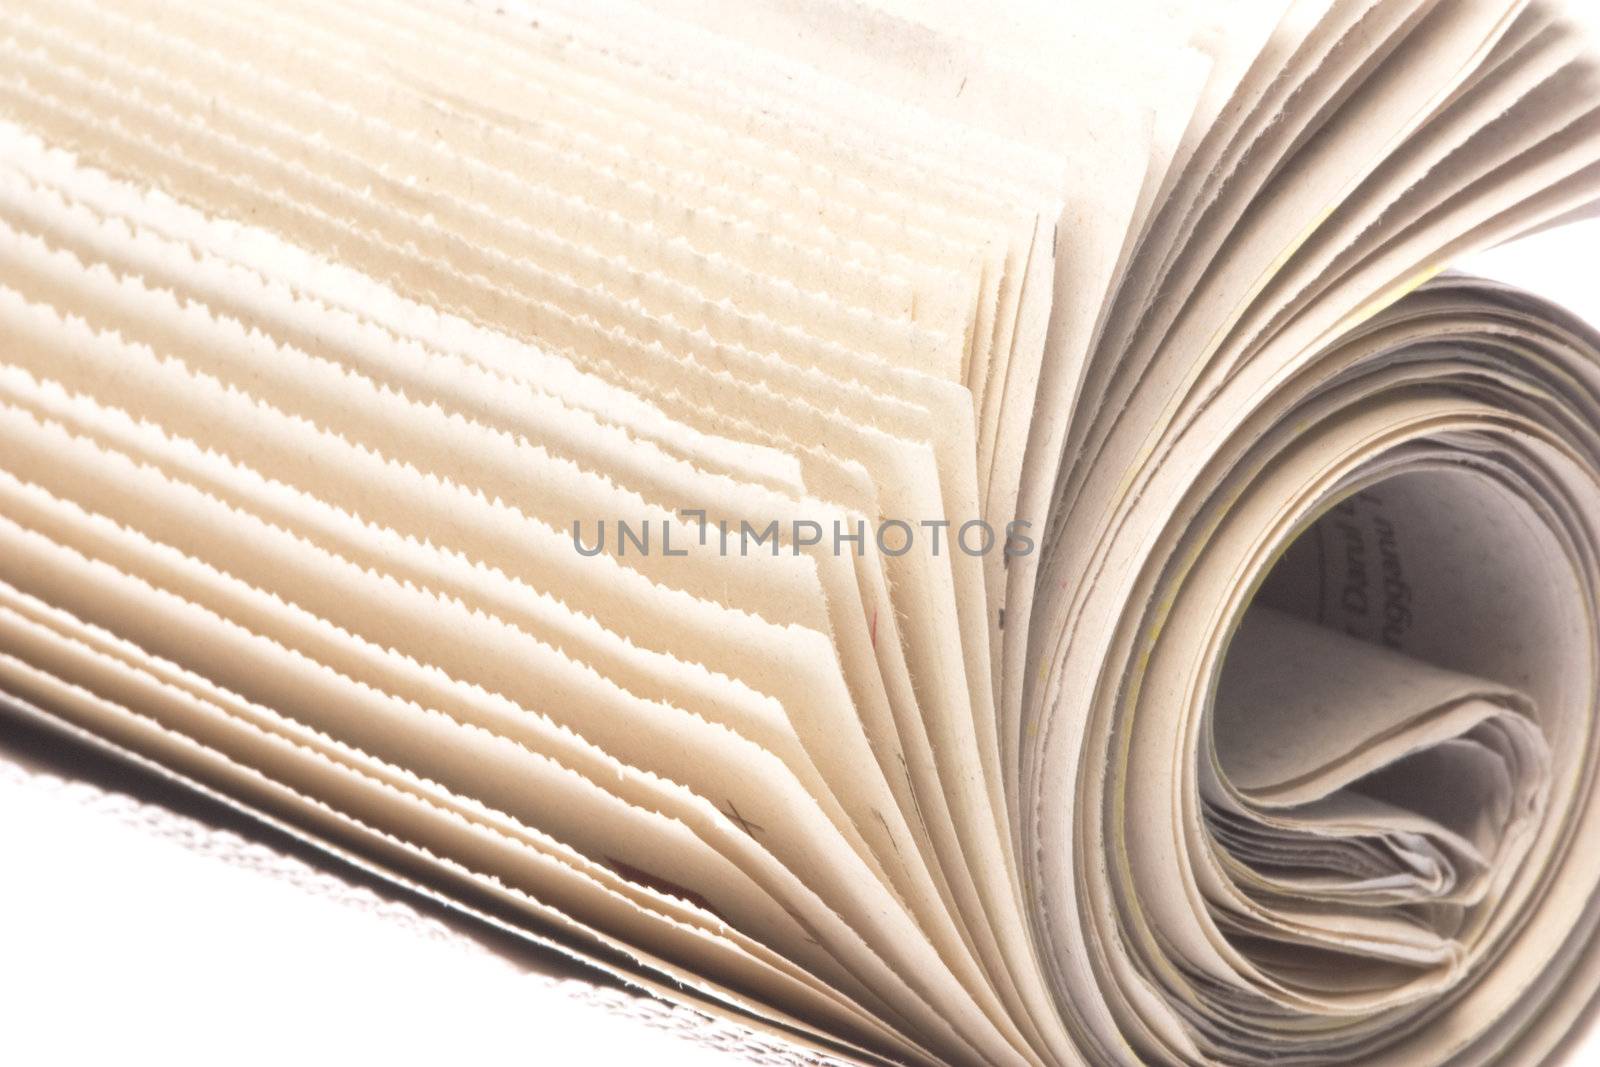 Isolated image of a roll of newspaper.